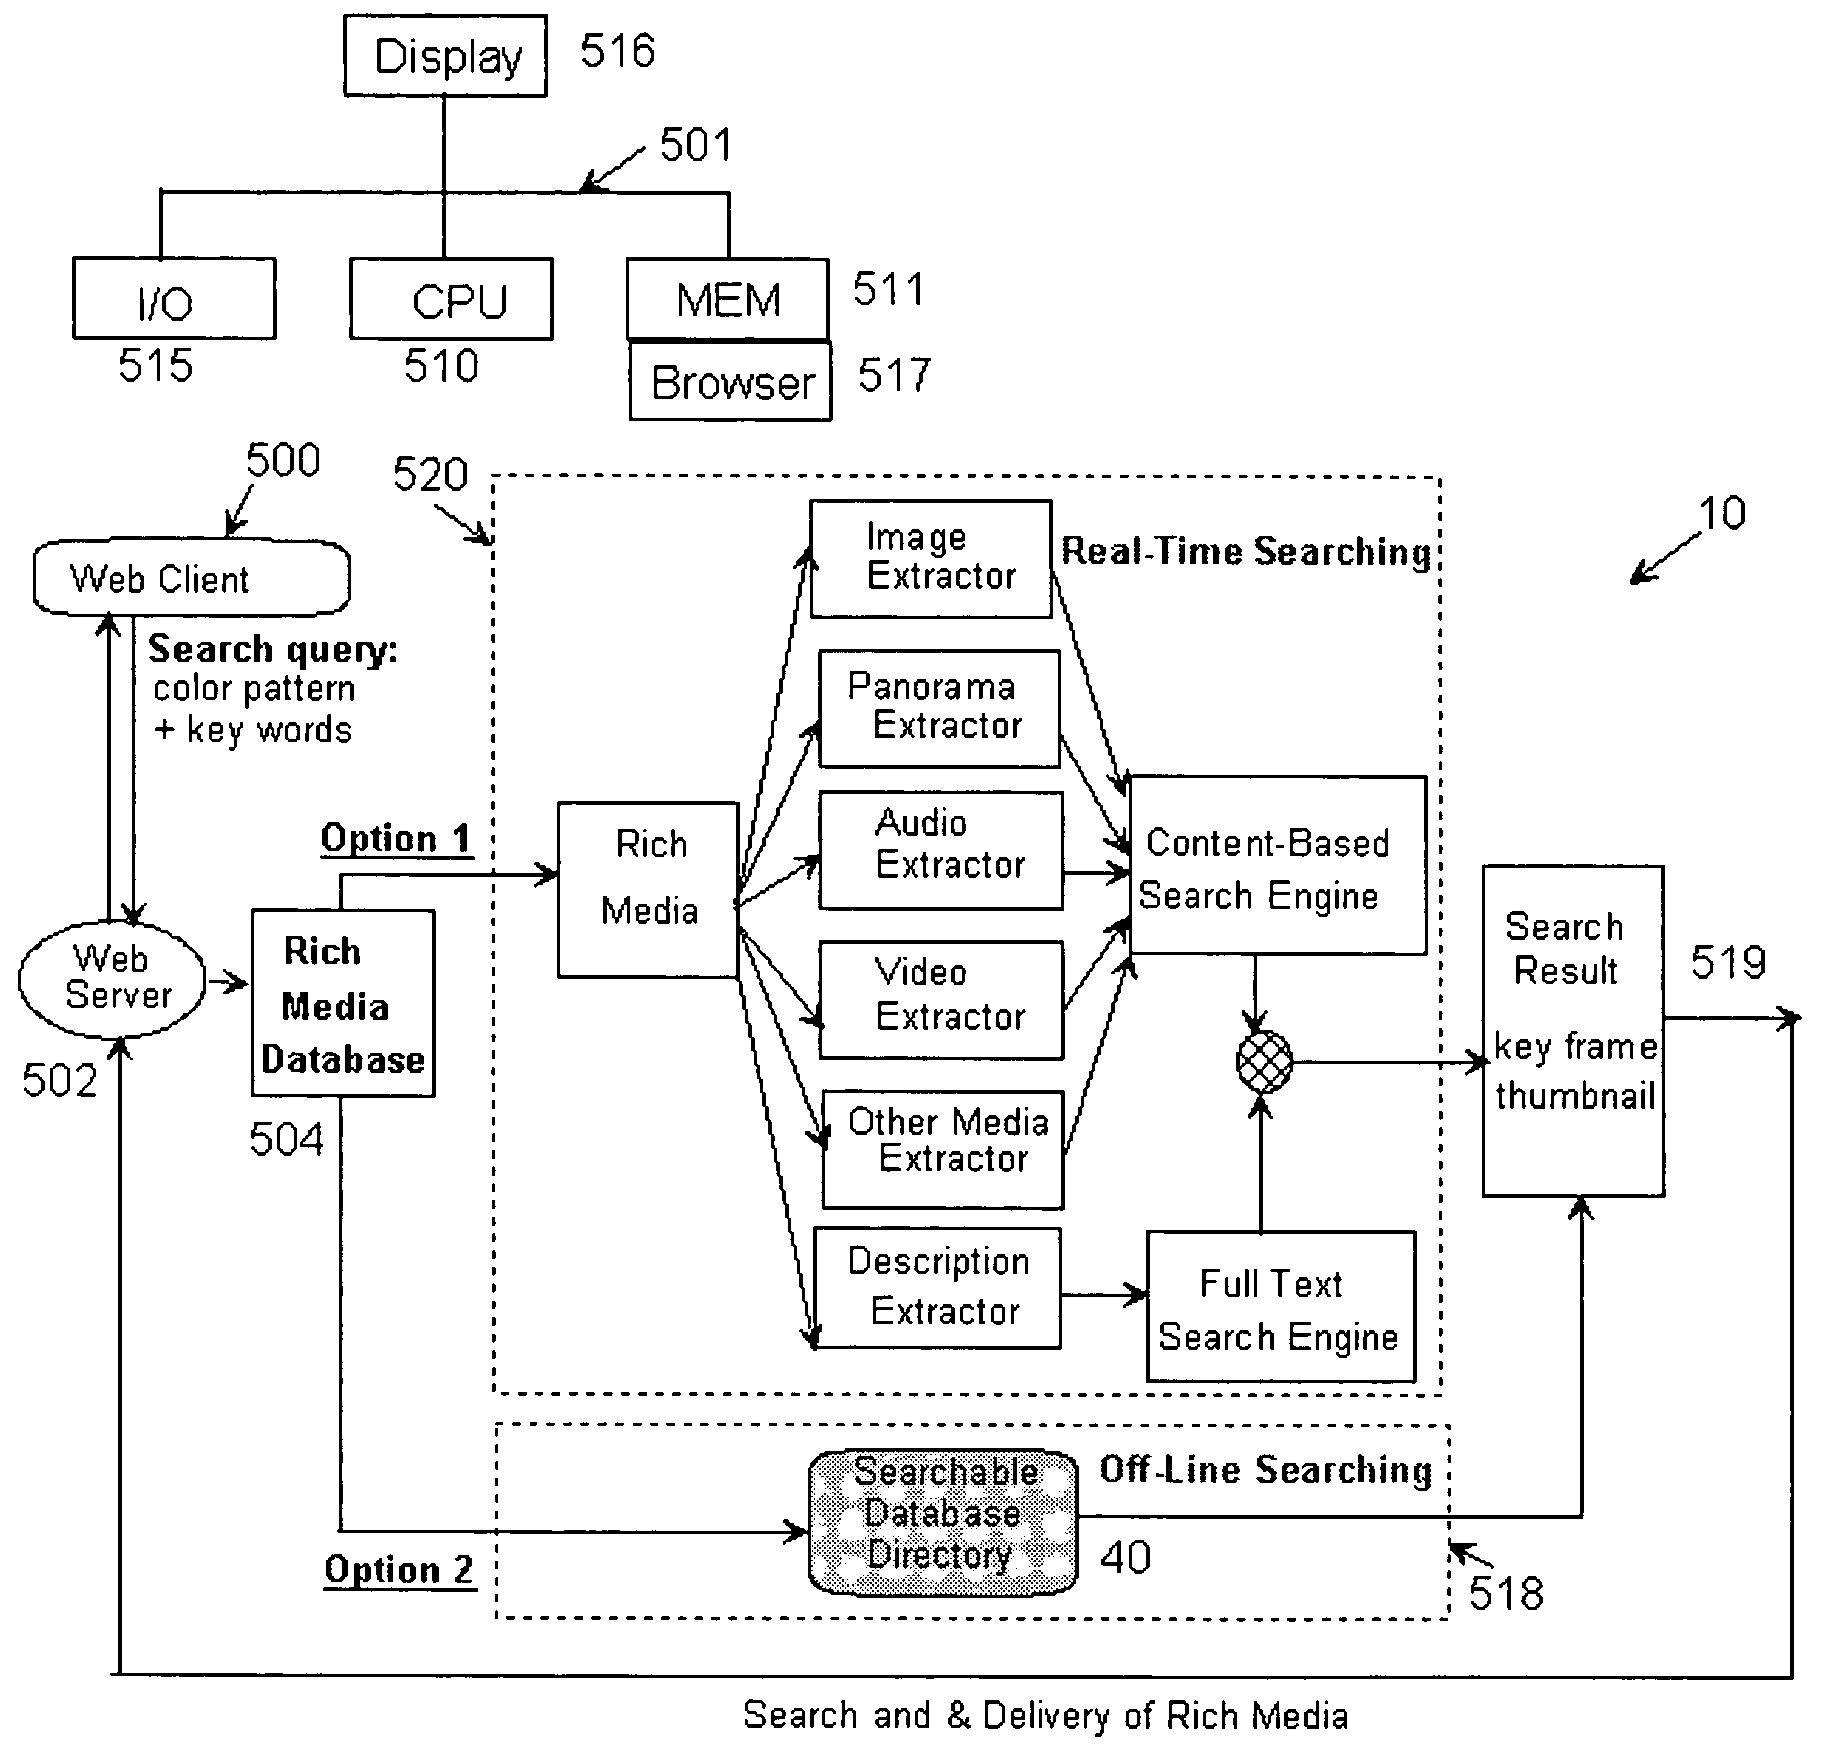 System and method for management, creation, storage, search and delivery of rich media optimized for e-commerce in a distributed information network